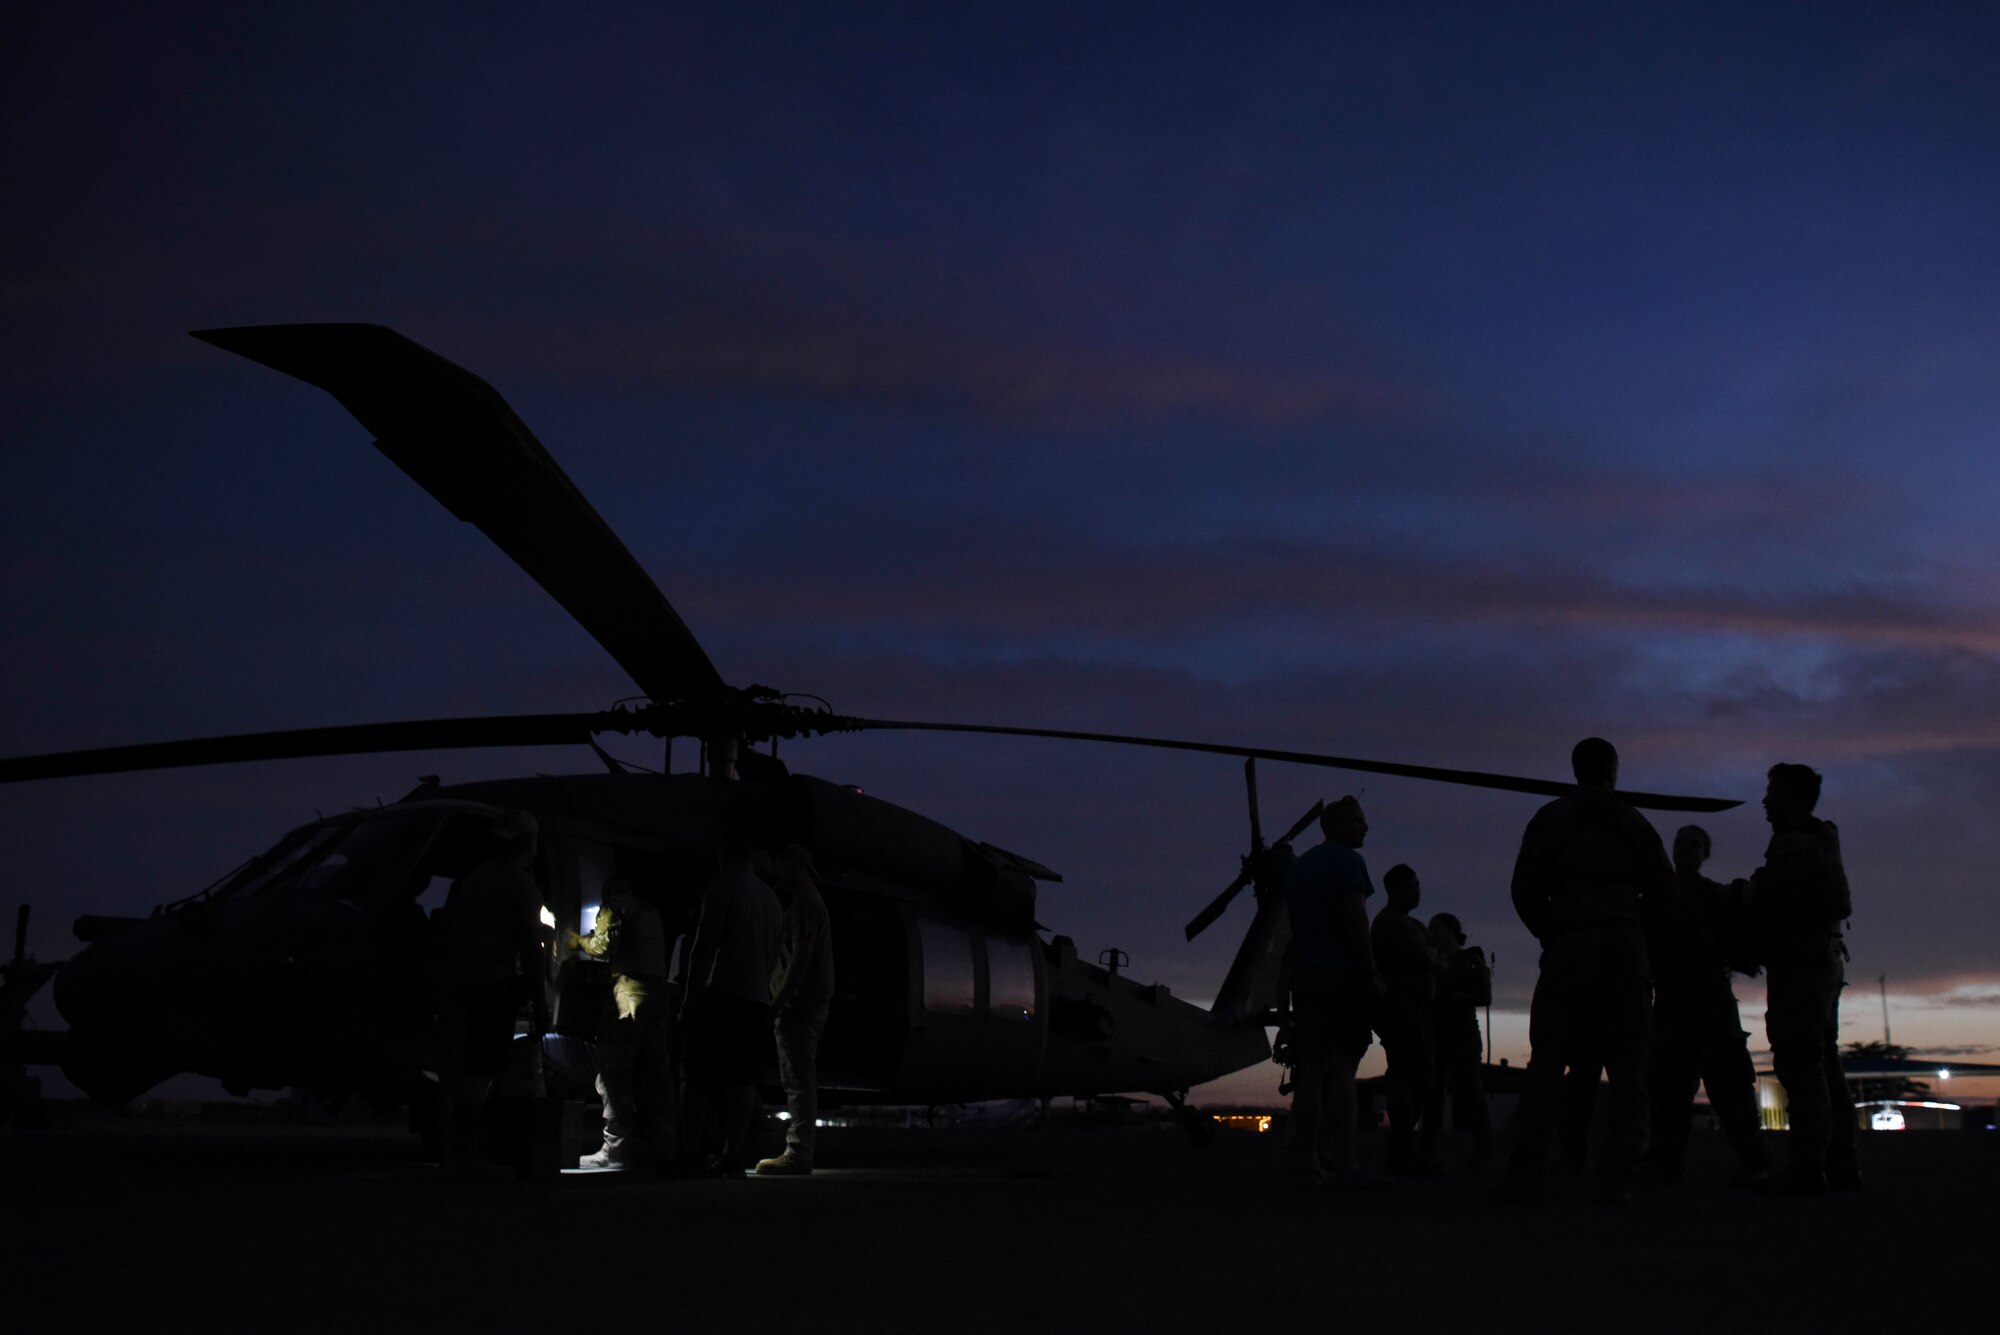 Members of the 303rd Expeditionary Rescue Squadron discuss last minute mission plans prior to boarding a HH-60G Pave Hawk during an exercise at Camp Simba, Kenya, March 24, 2021.